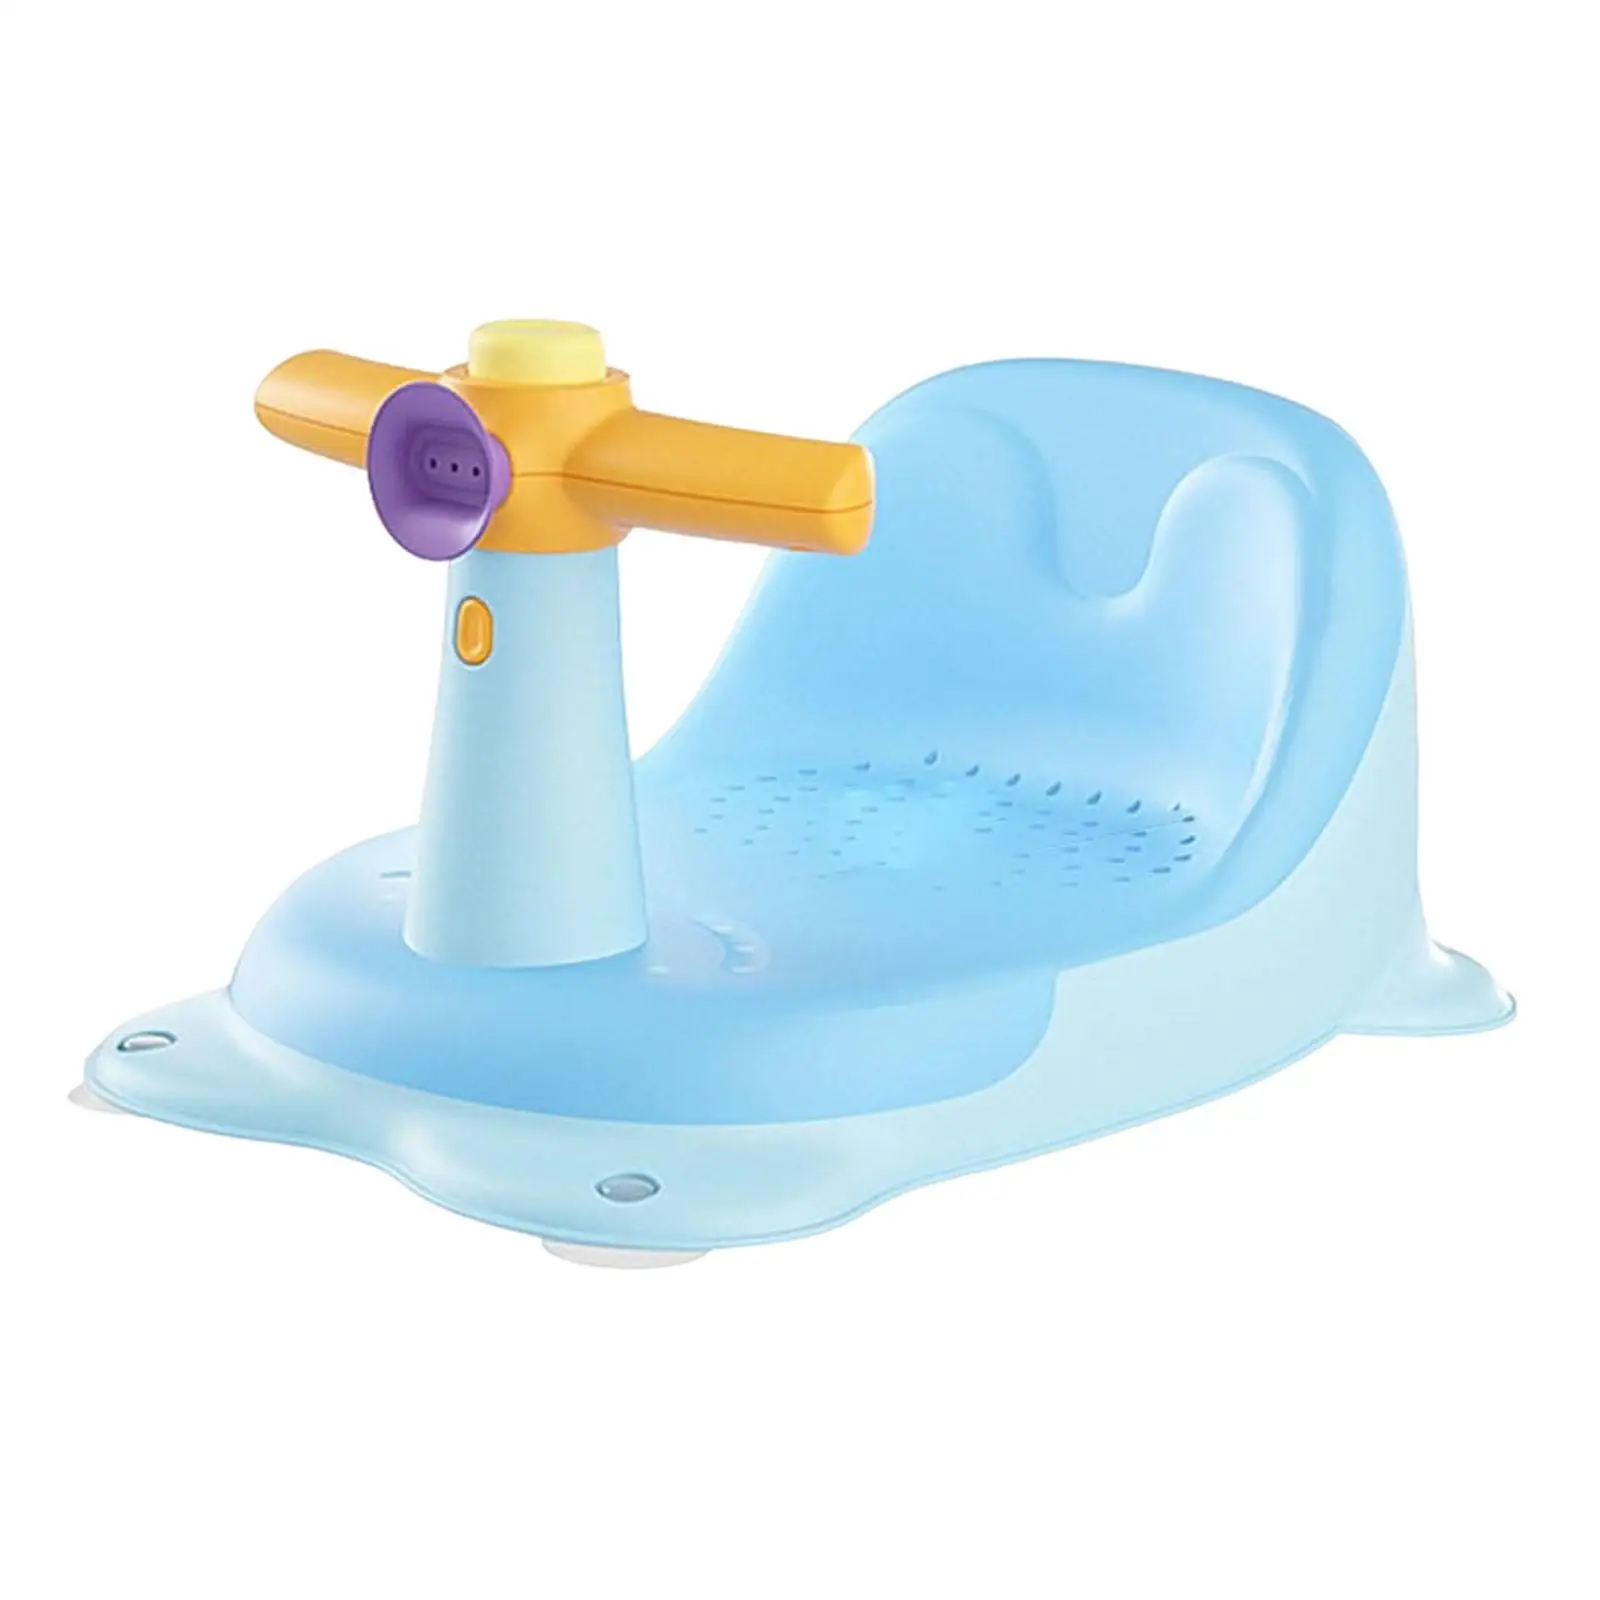 Portable Baby Bathtub Seat Bath Seat Support Seat Pad for 6-18 Months